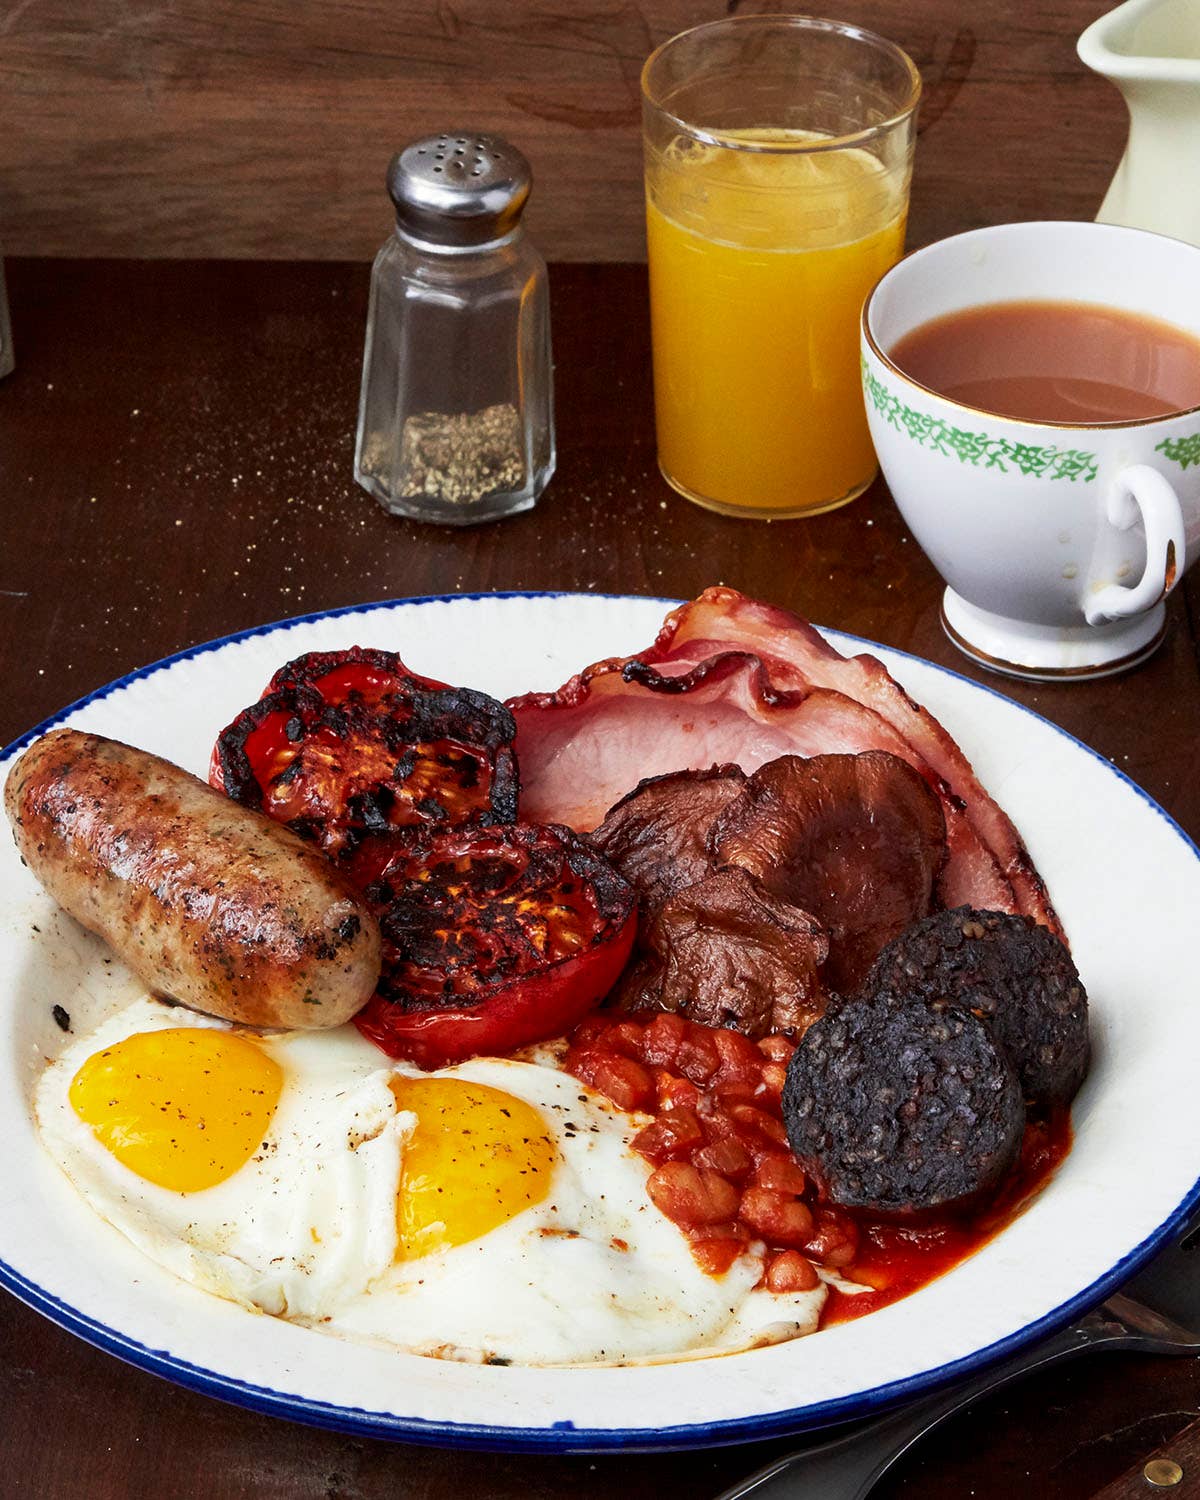 How to Make a Full English Breakfast